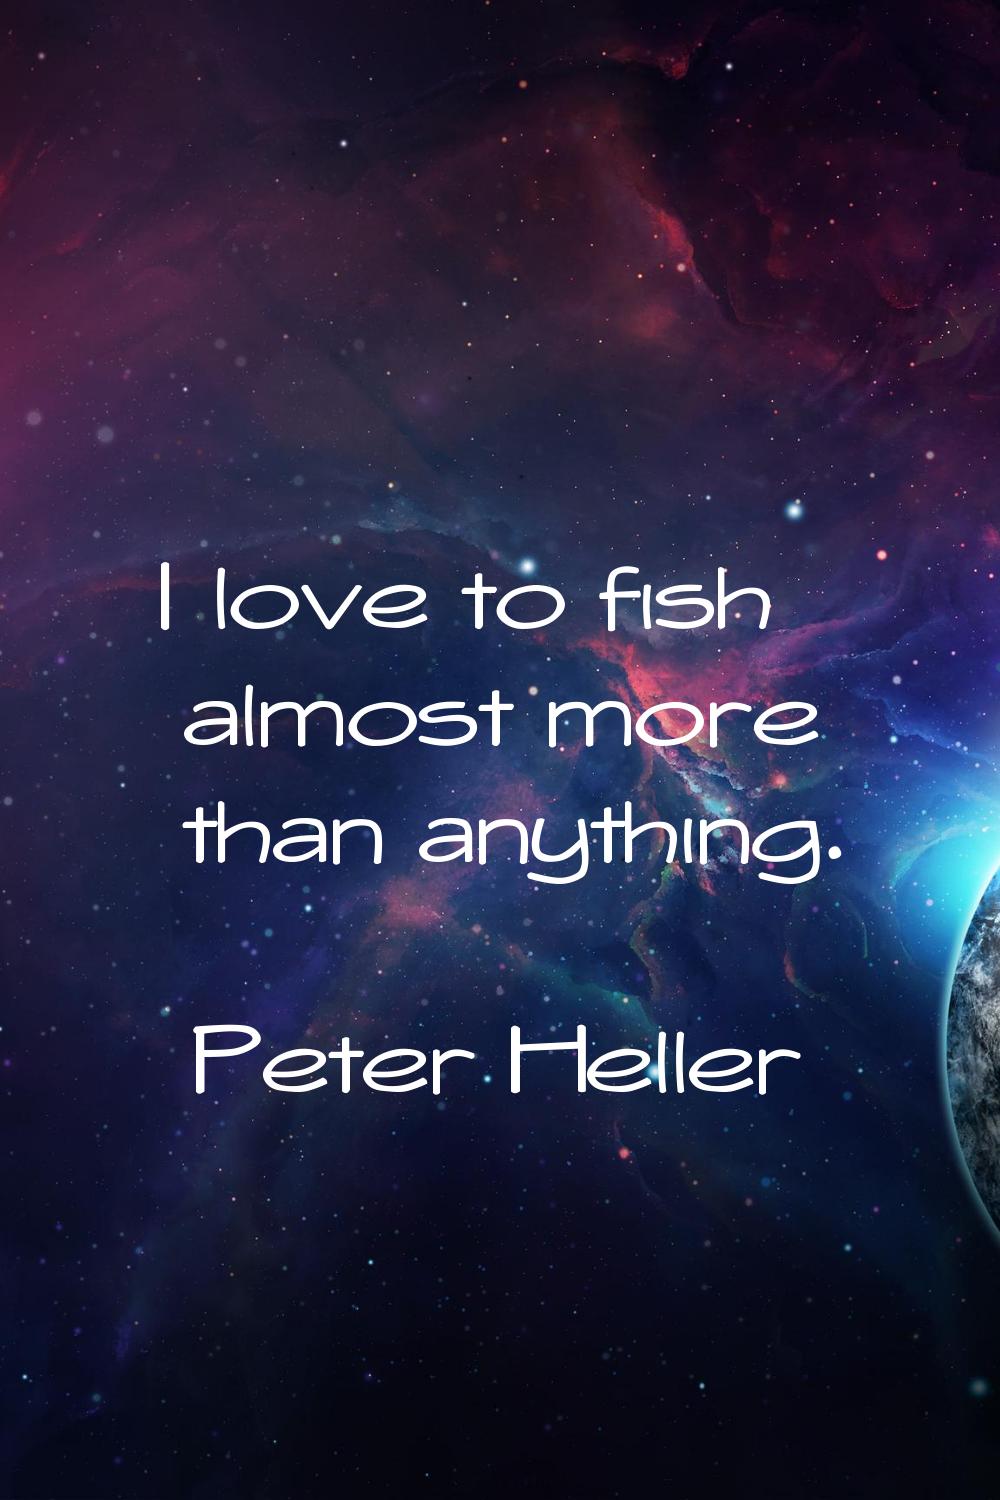 I love to fish almost more than anything.